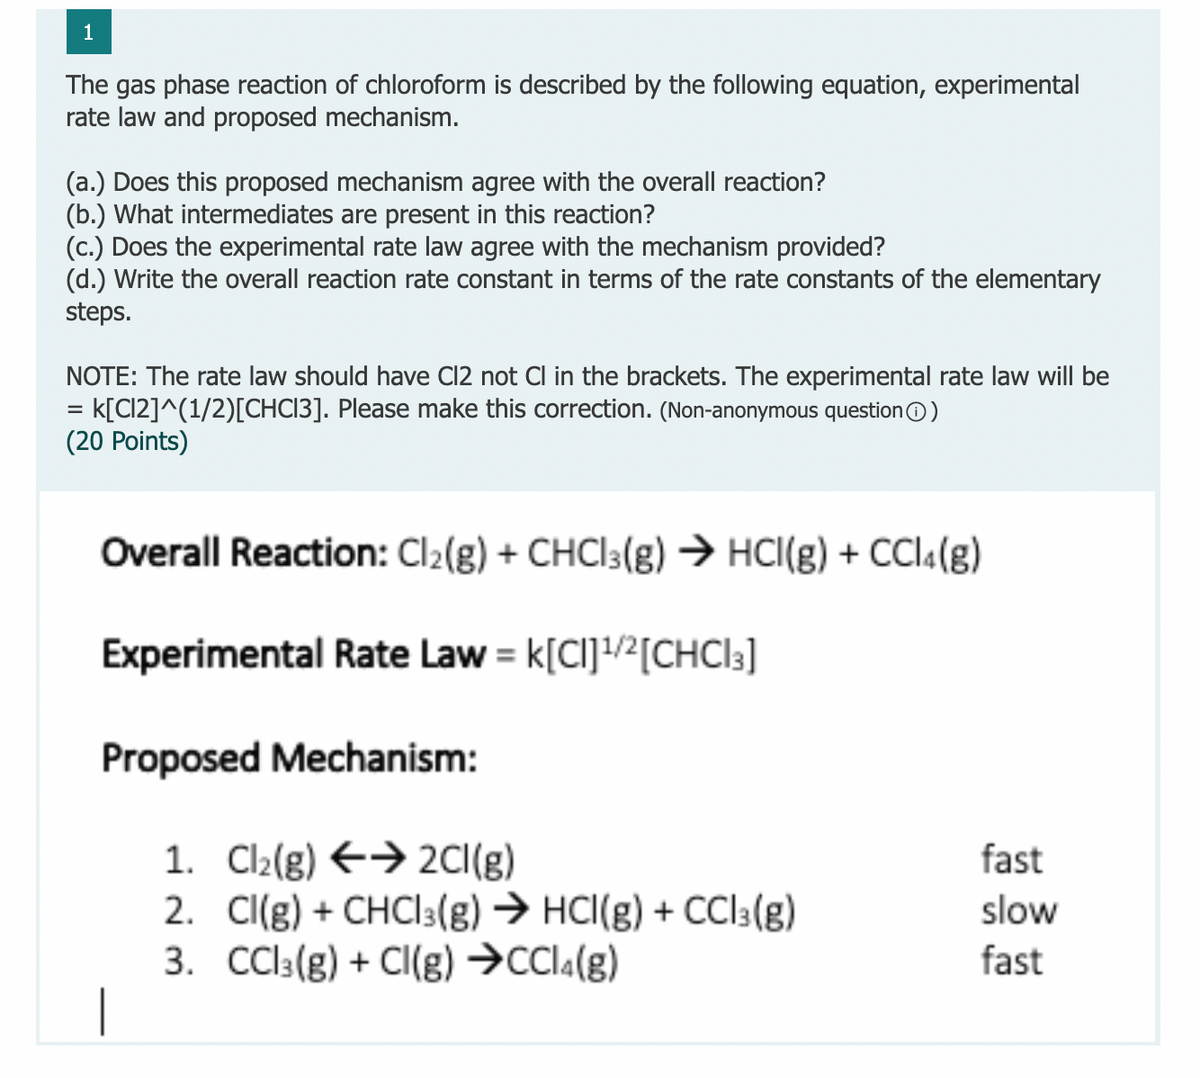 1
The gas phase reaction of chloroform is described by the following equation, experimental
rate law and proposed mechanism.
(a.) Does this proposed mechanism agree with the overall reaction?
(b.) What intermediates are present in this reaction?
(c.) Does the experimental rate law agree with the mechanism provided?
(d.) Write the overall reaction rate constant in terms of the rate constants of the elementary
steps.
NOTE: The rate law should have Cl2 not Cl in the brackets. The experimental rate law will be
k[C12]^(1/2)[CHC13]. Please make this correction. (Non-anonymous questionO)
(20 Points)
%3D
Overall Reaction: Cl2(g) + CHCI3(g) → HCI(g) + CCl4(g)
Experimental Rate Law = k[CI]!/2[CHCI3]
Proposed Mechanism:
1. Cl2(g) E→ 2CI(g)
2. Cl(g) + CHCI3(g) → HCI(g) + CCI3(g)
3. Cl3(g) + Cl(g) →CCI«(g)
fast
slow
fast
